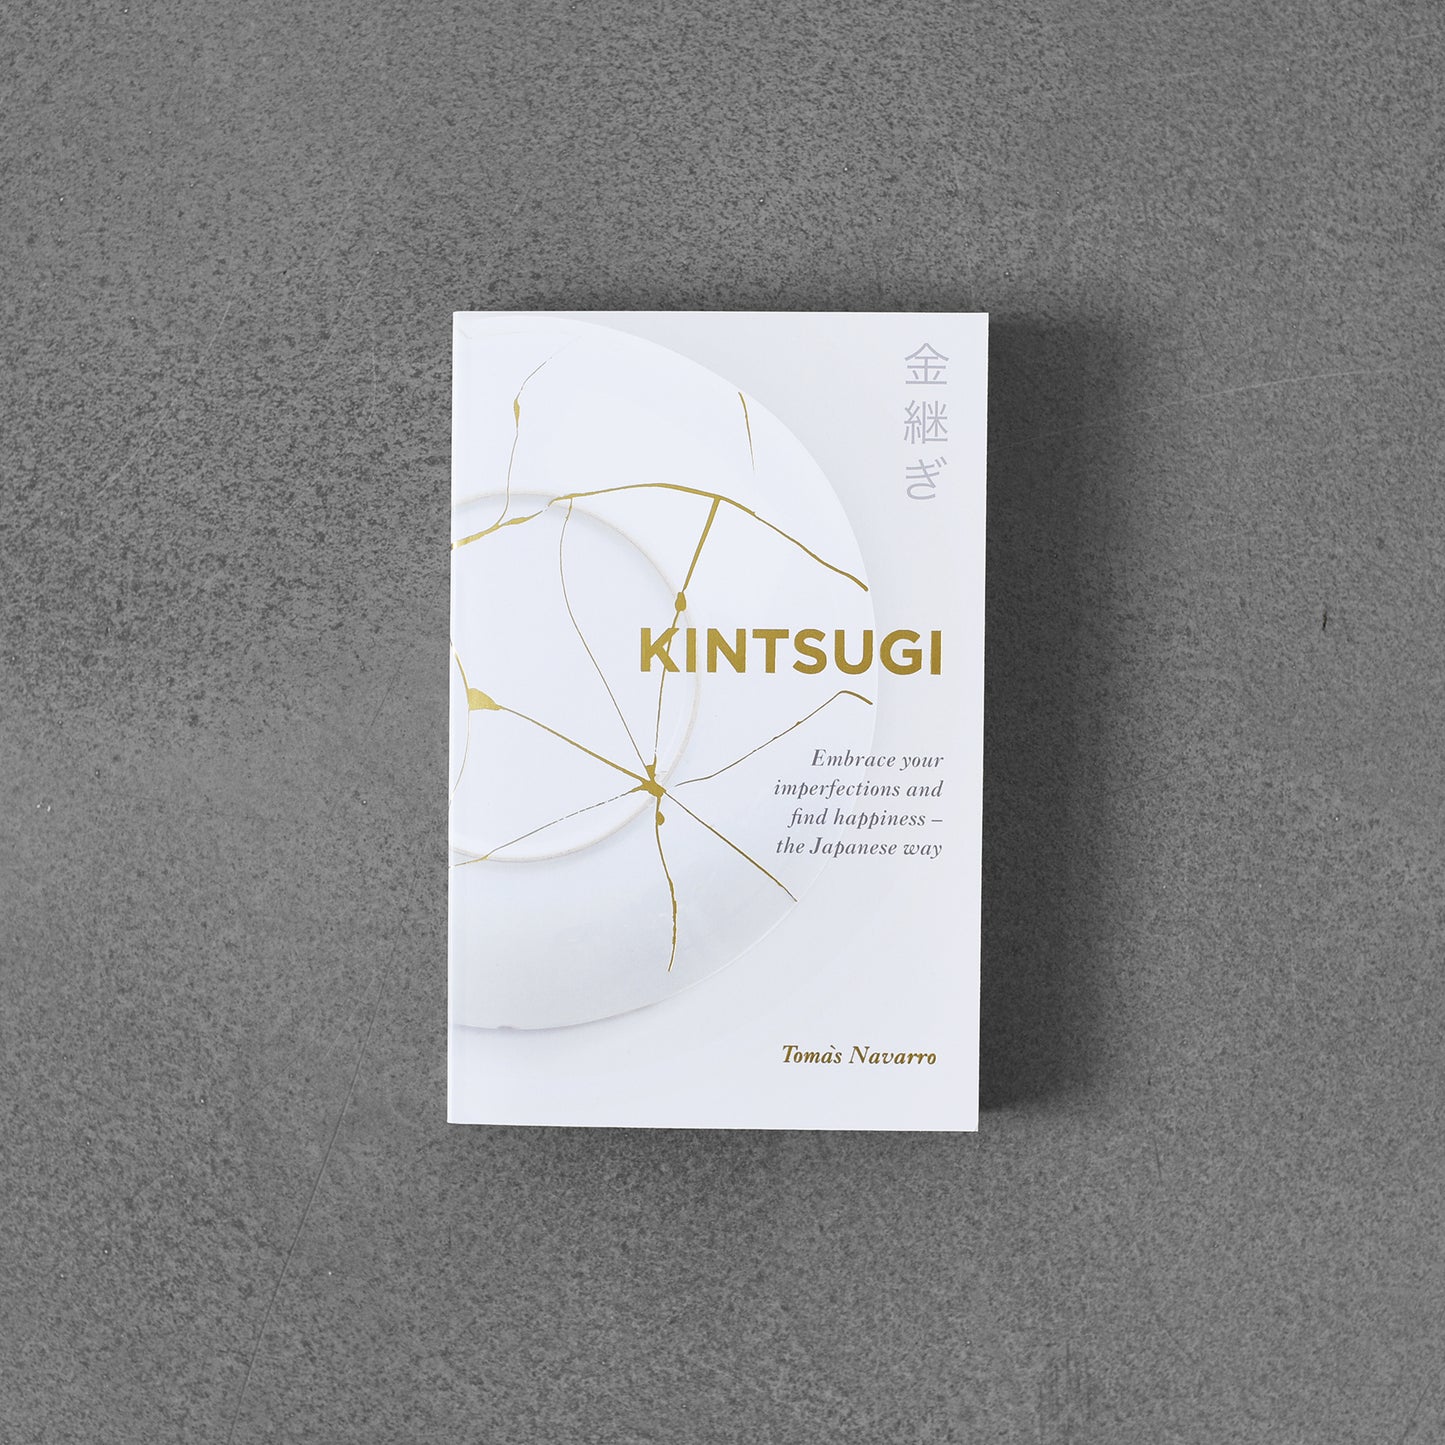 Kintsugi : Embrace your imperfections and find happiness - the Japanese way